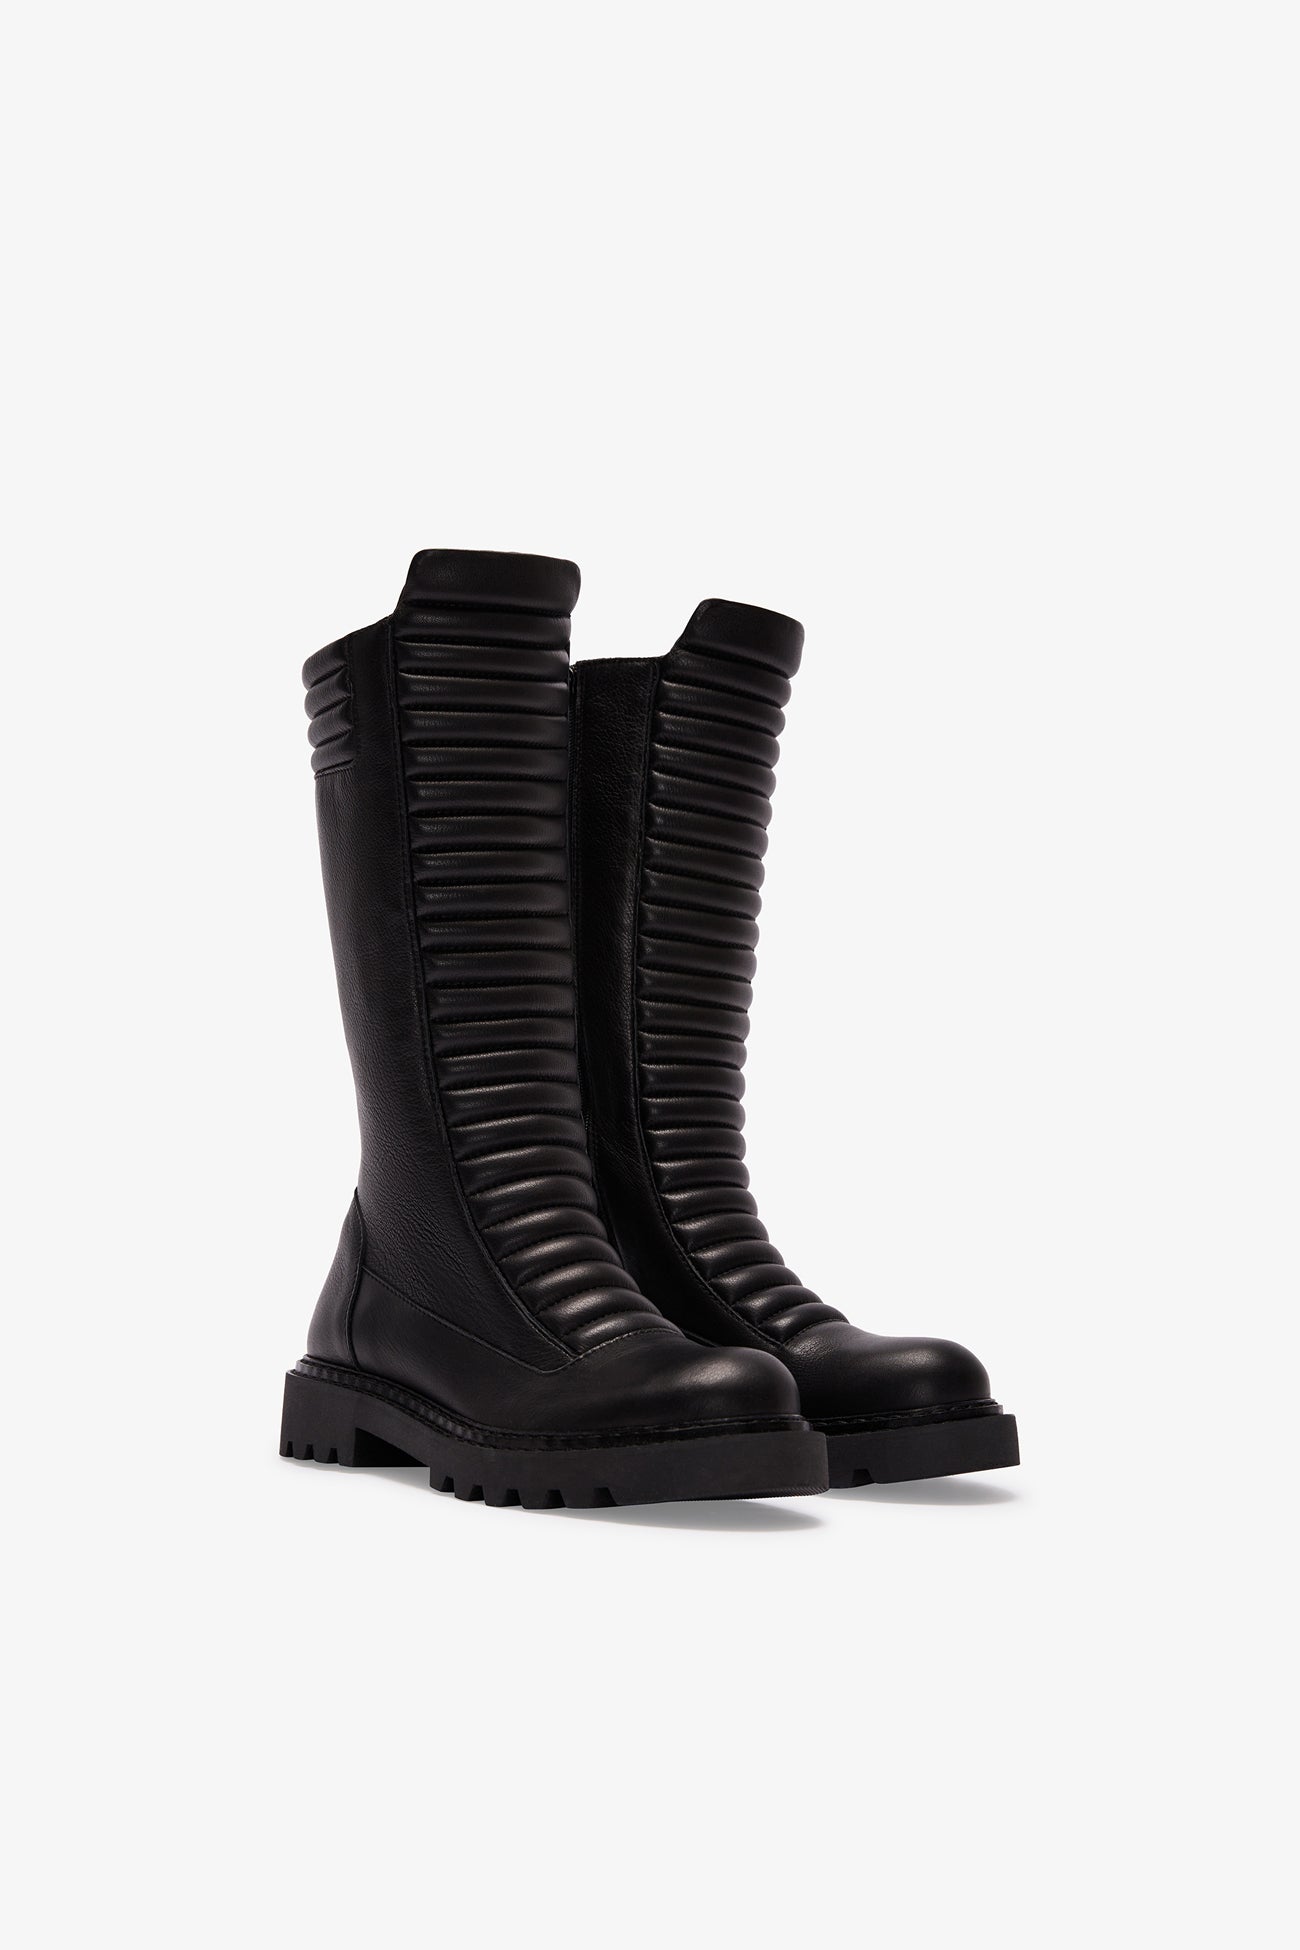 Black Leather Tall Ribbed Moto Sneaker Boots - Zuri Boots | Marcella